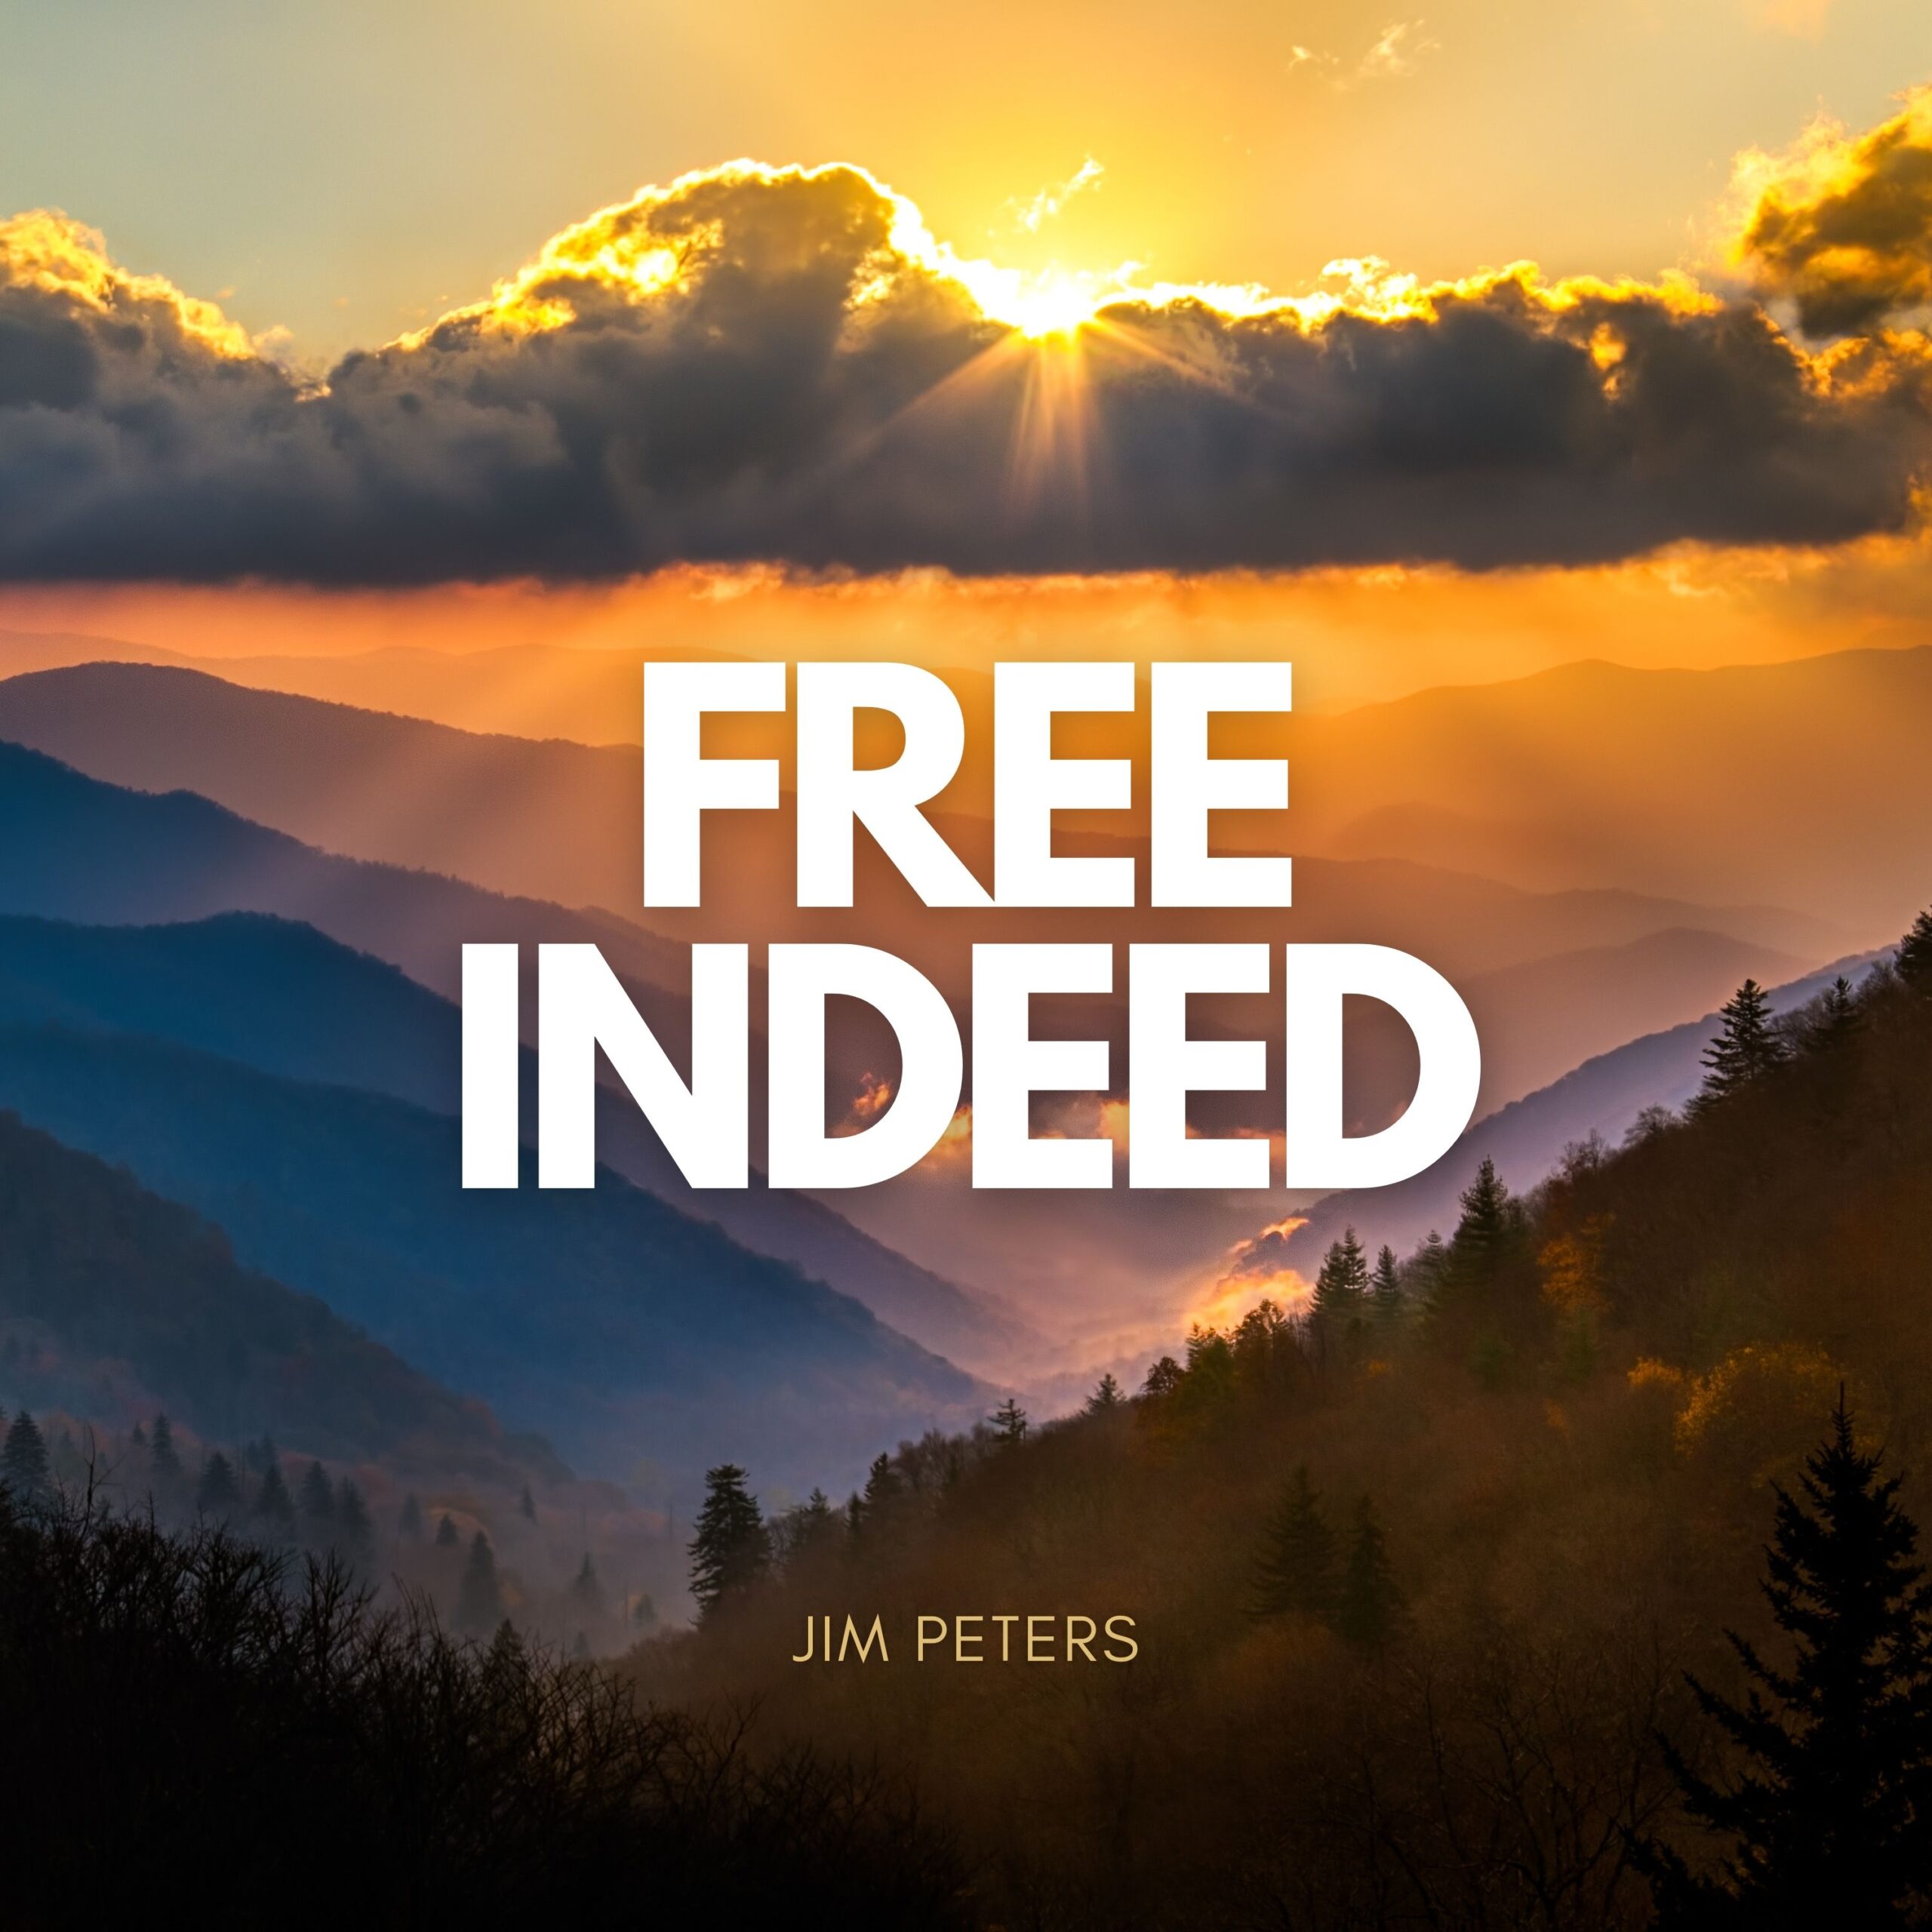 FREE INDEED! Jim Peters Christian Music